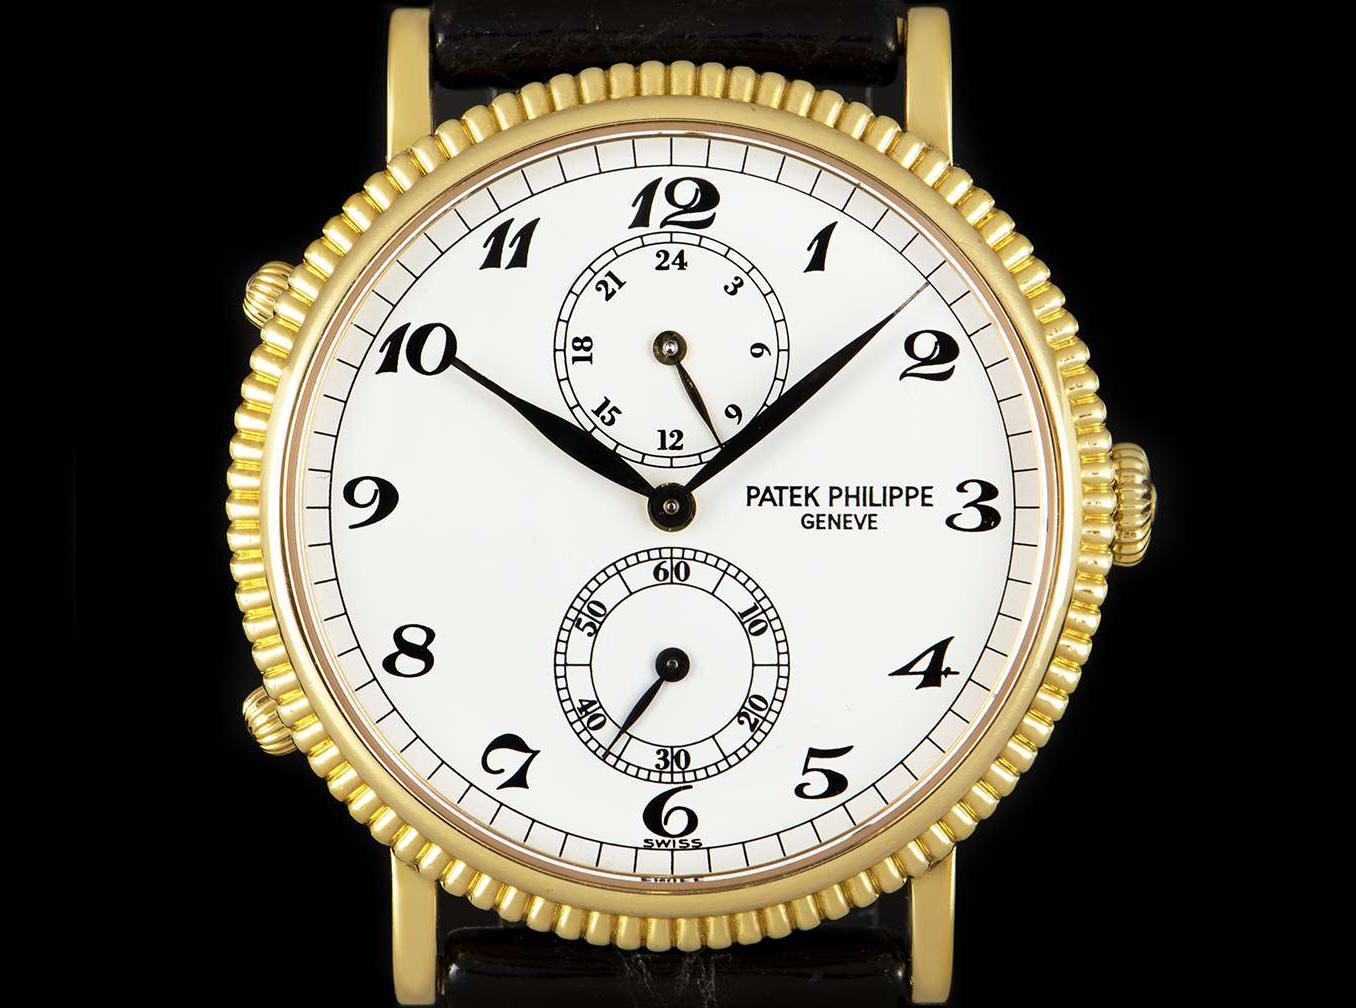 An 18k Yellow Gold 34mm Calatrava Travel Time Men's Wristwatch, white dial with arabic numbers, small seconds at 60'clock, 24 hour indicator at 120'clock, a fixed 18k yellow gold reeded bezel, an original black leather strap with an original 18k